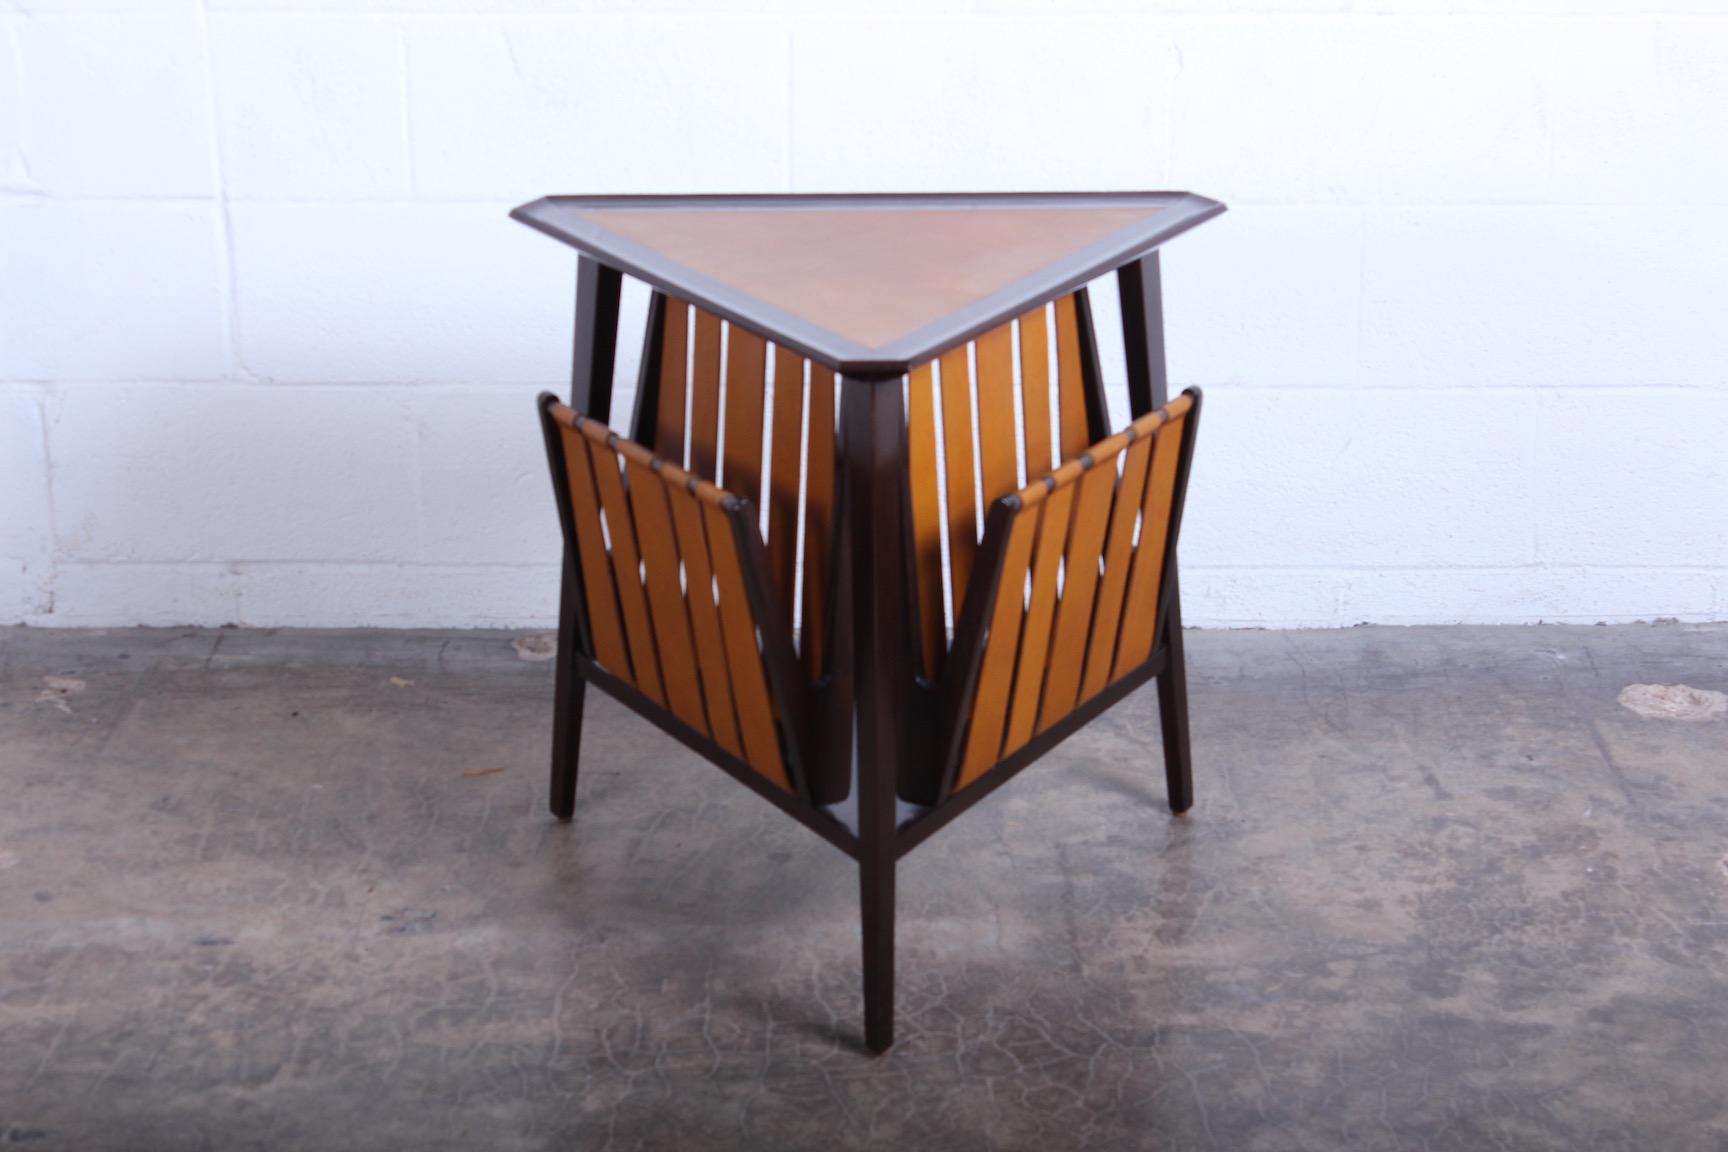 A triangular ash magazine table with inset leather top and leather straps. Designed by Edward Wormley for Dunbar.